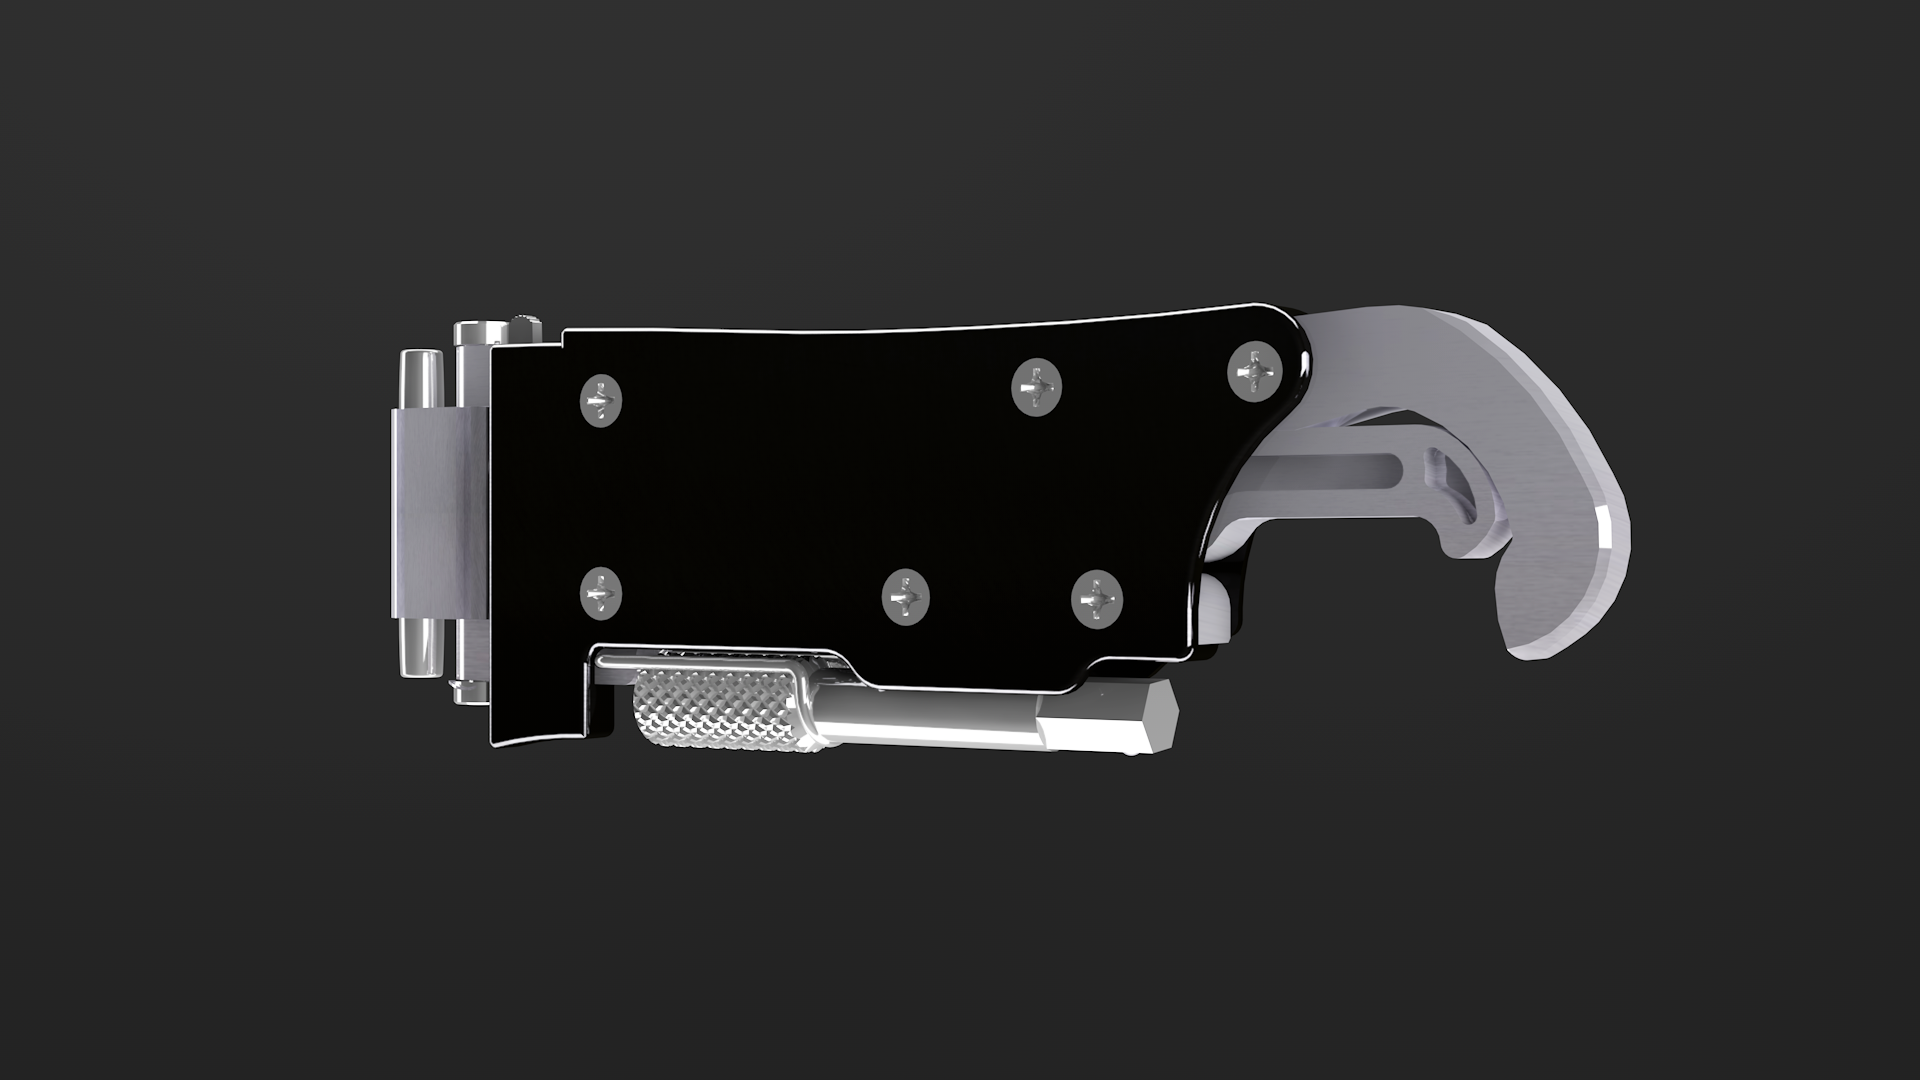  OMINLOCK™ wrench stubby configuration for tight spots and easy carry   